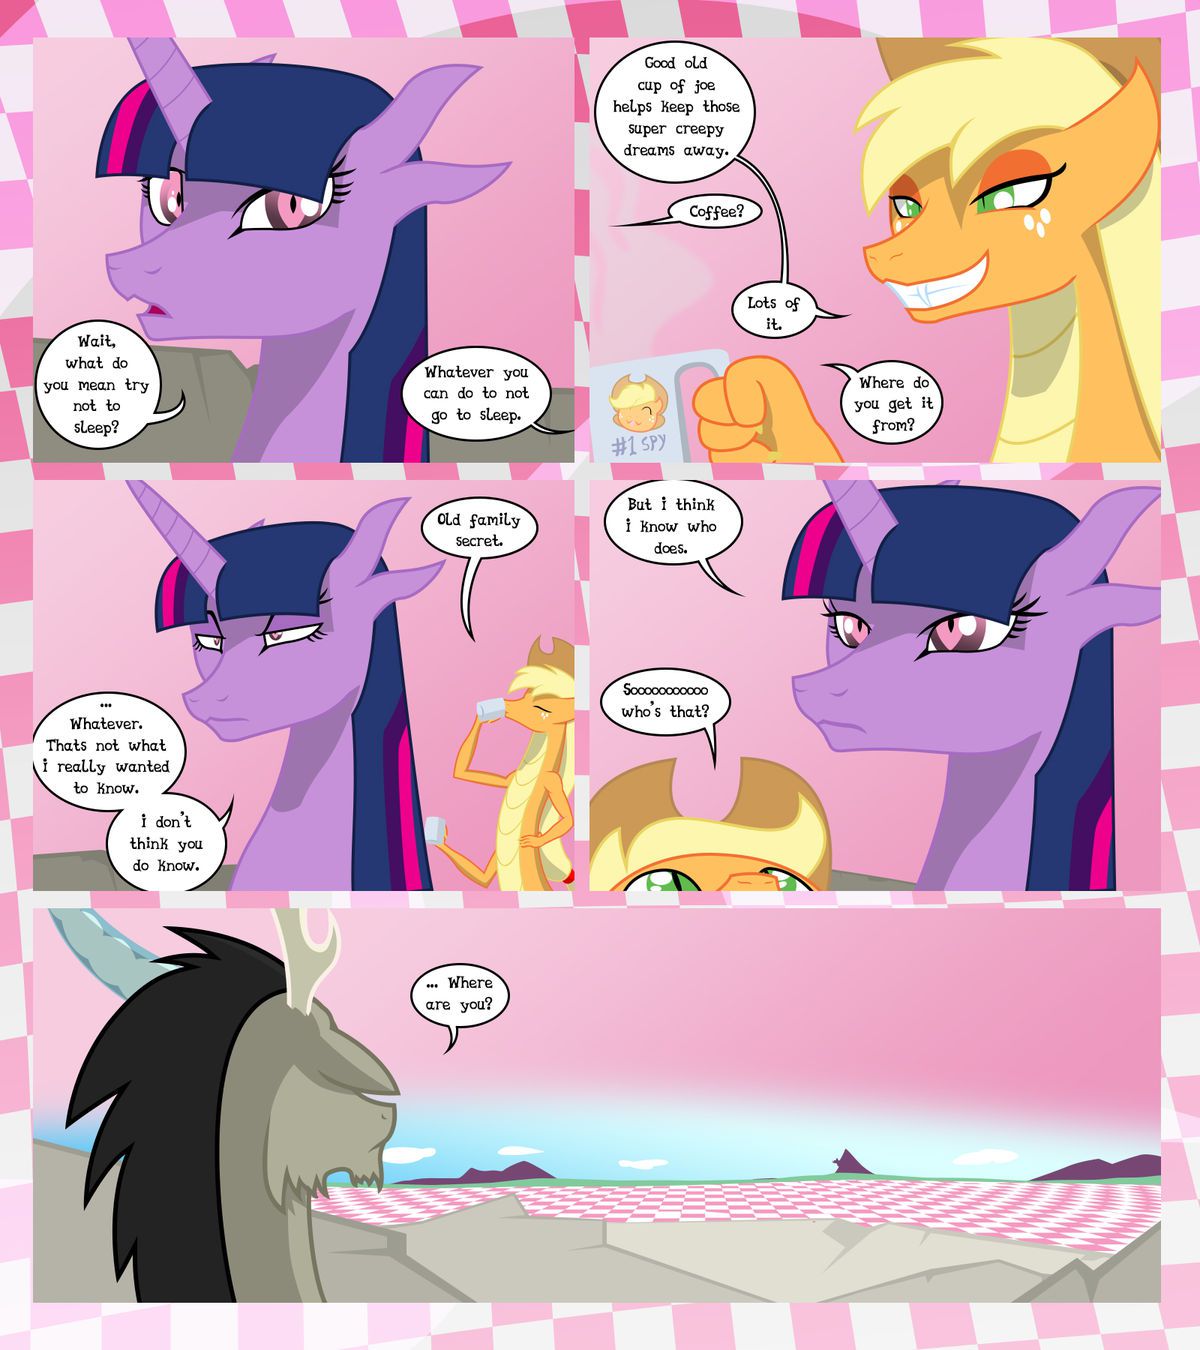 [GatesMcCloud] Cutie Mark Crusaders 10k: Chapter 3 - The Lost (My Little Pony: Friendship is Magic) [English] [Ongoing] 68